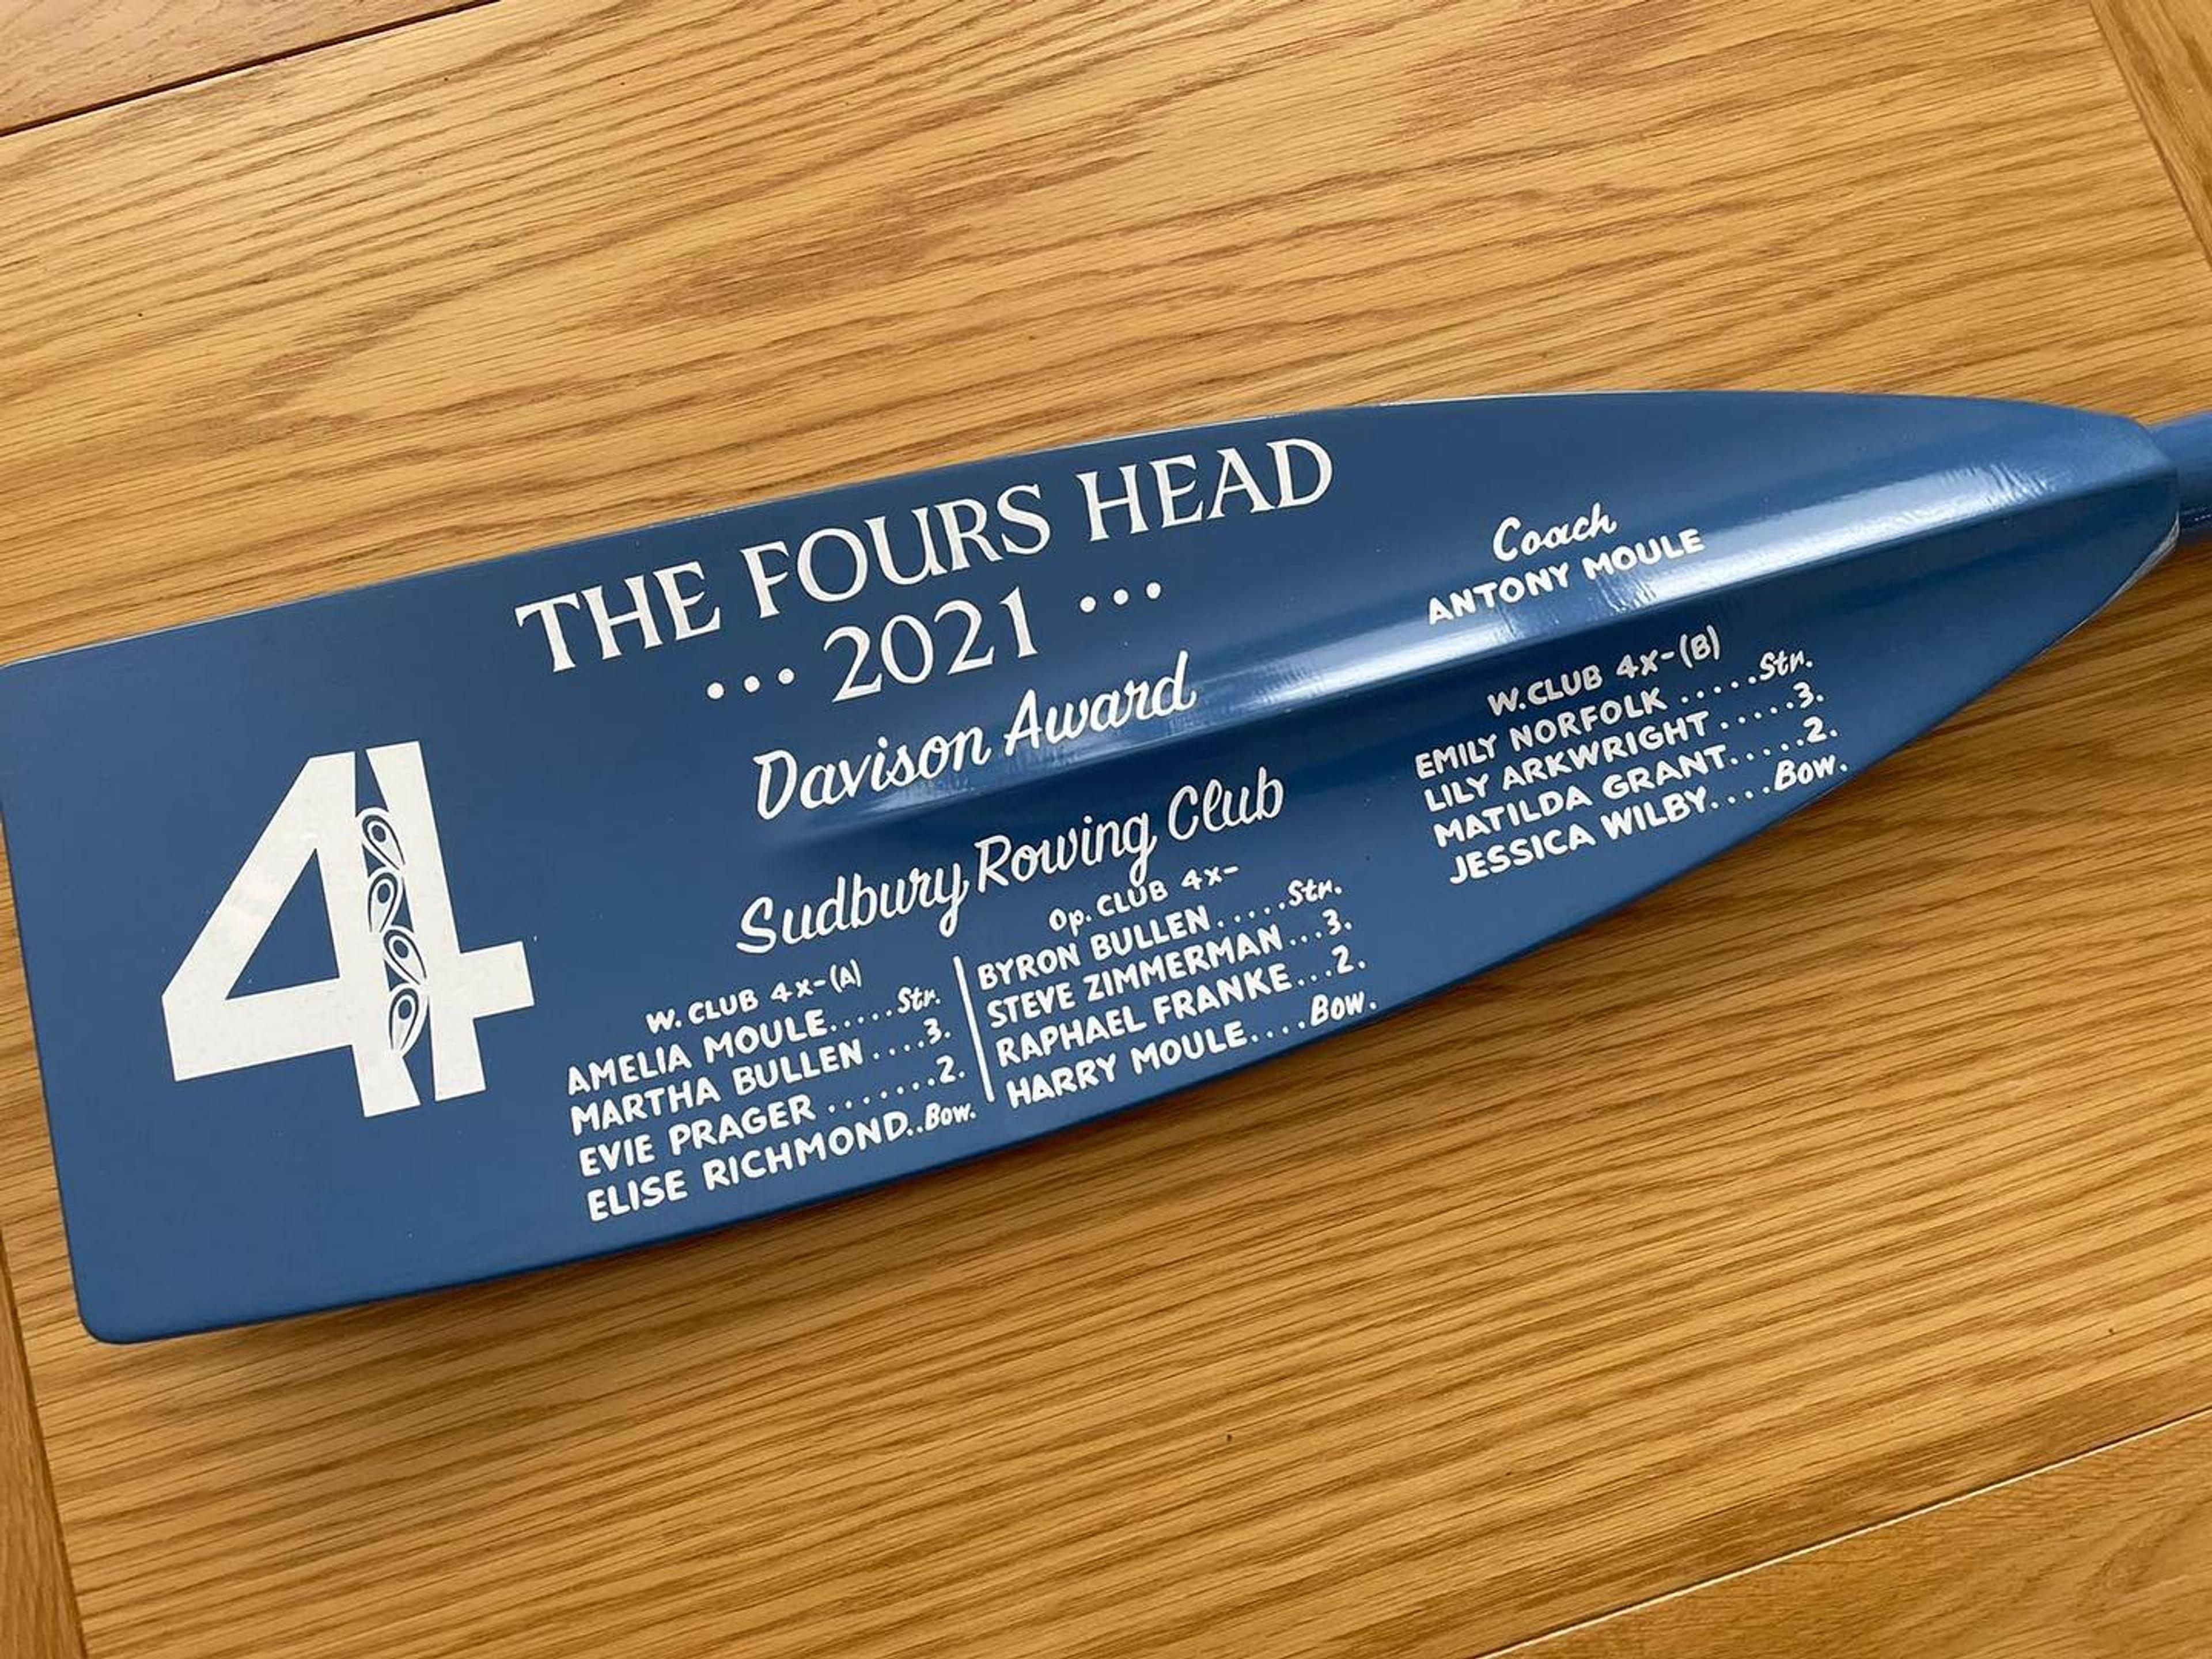 The blue award blade prize., now signwritten with the names of the winning crews.